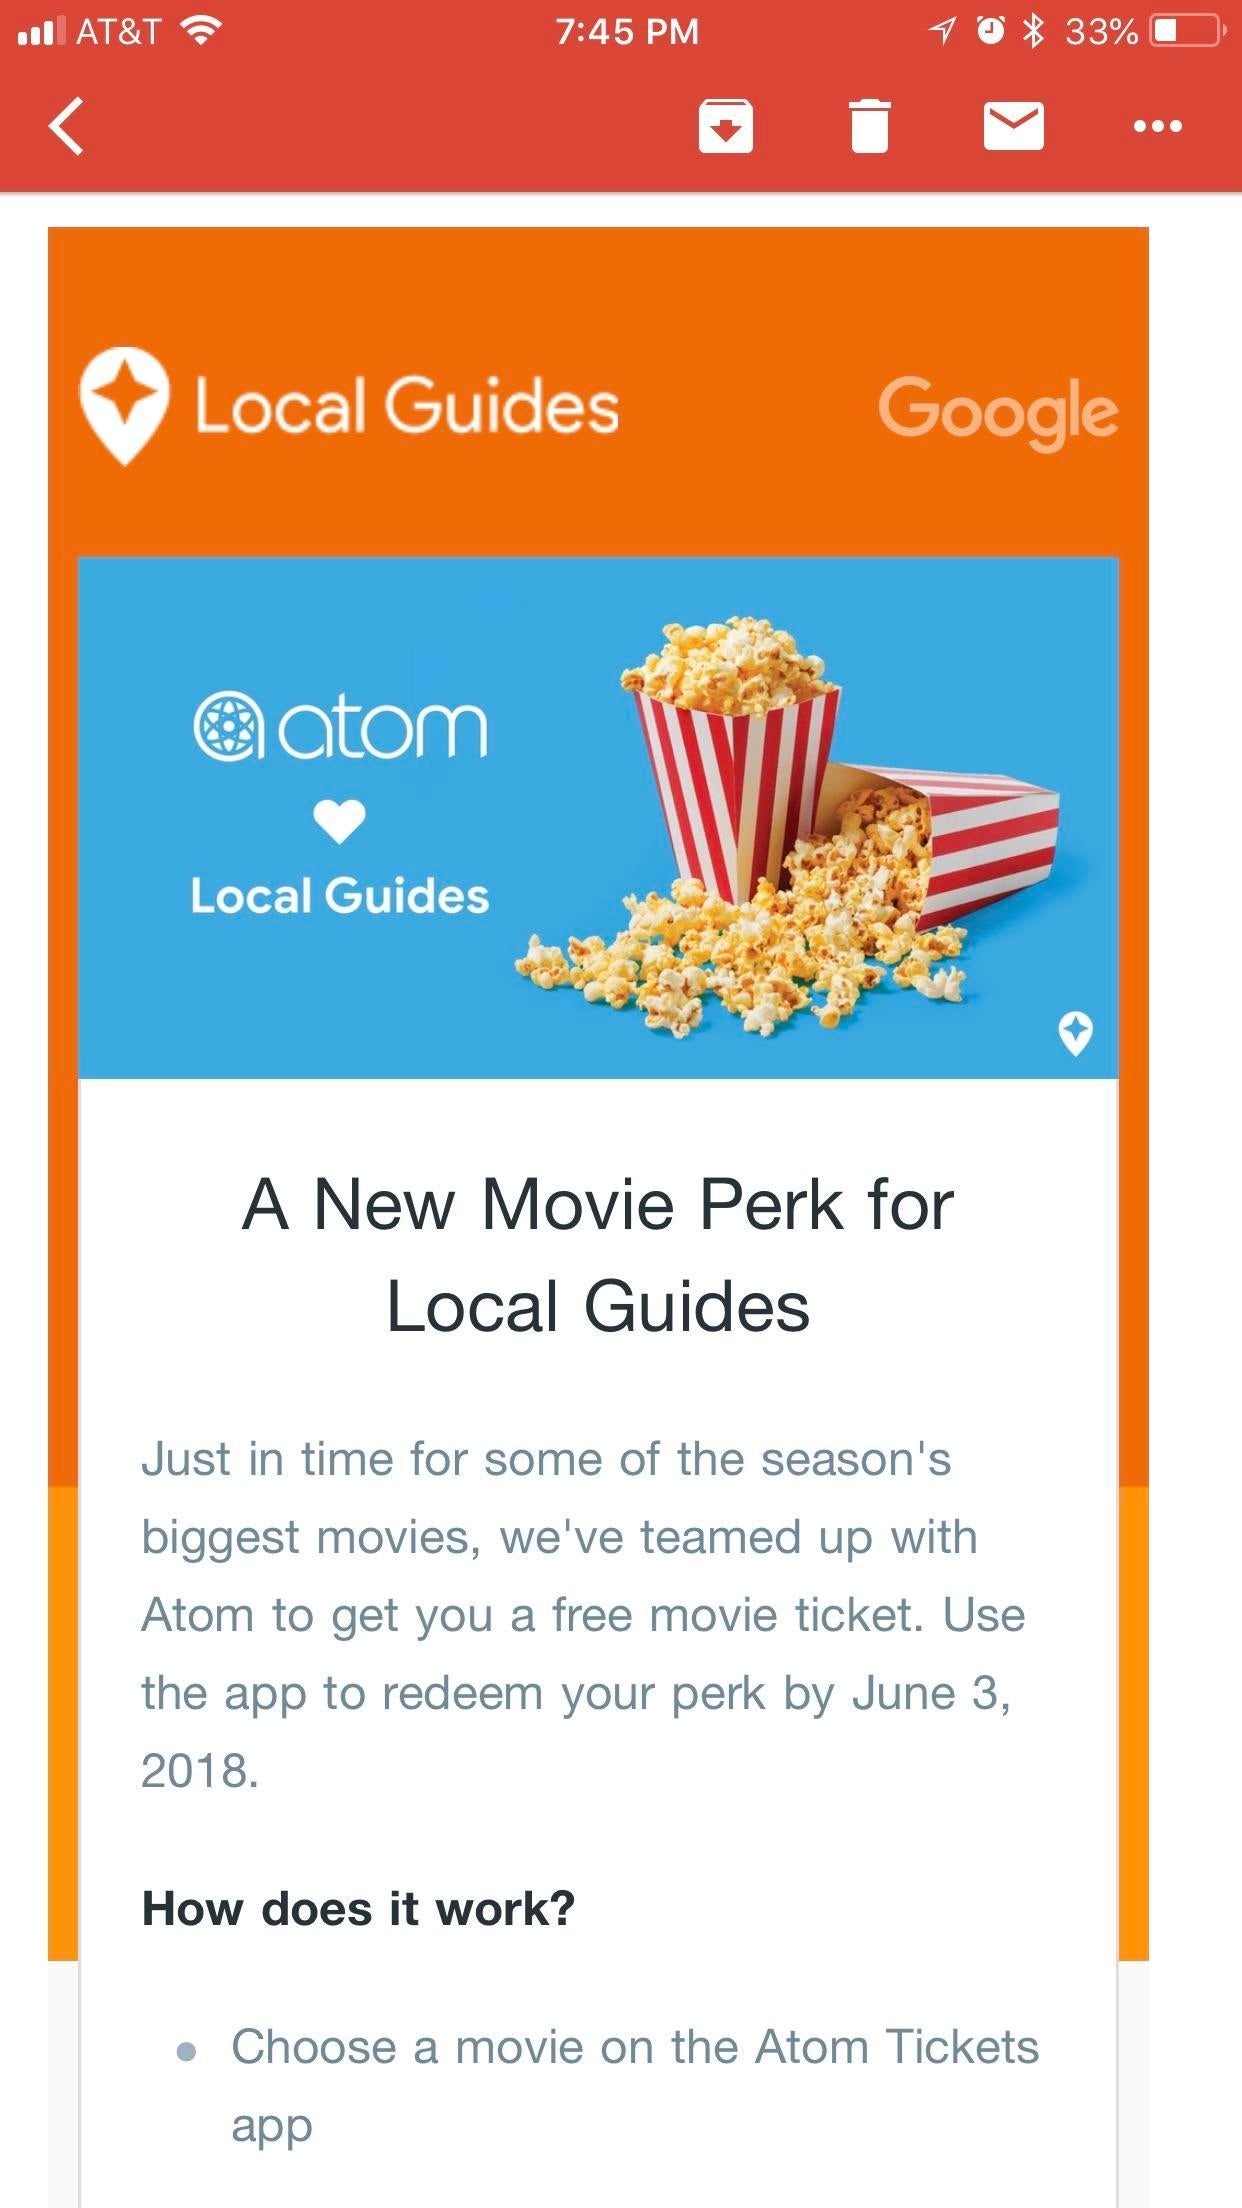 Google's new Local Guides reward initiative involves discounts on movie tickets - Google is giving away discount codes for movie tickets to Local Guides